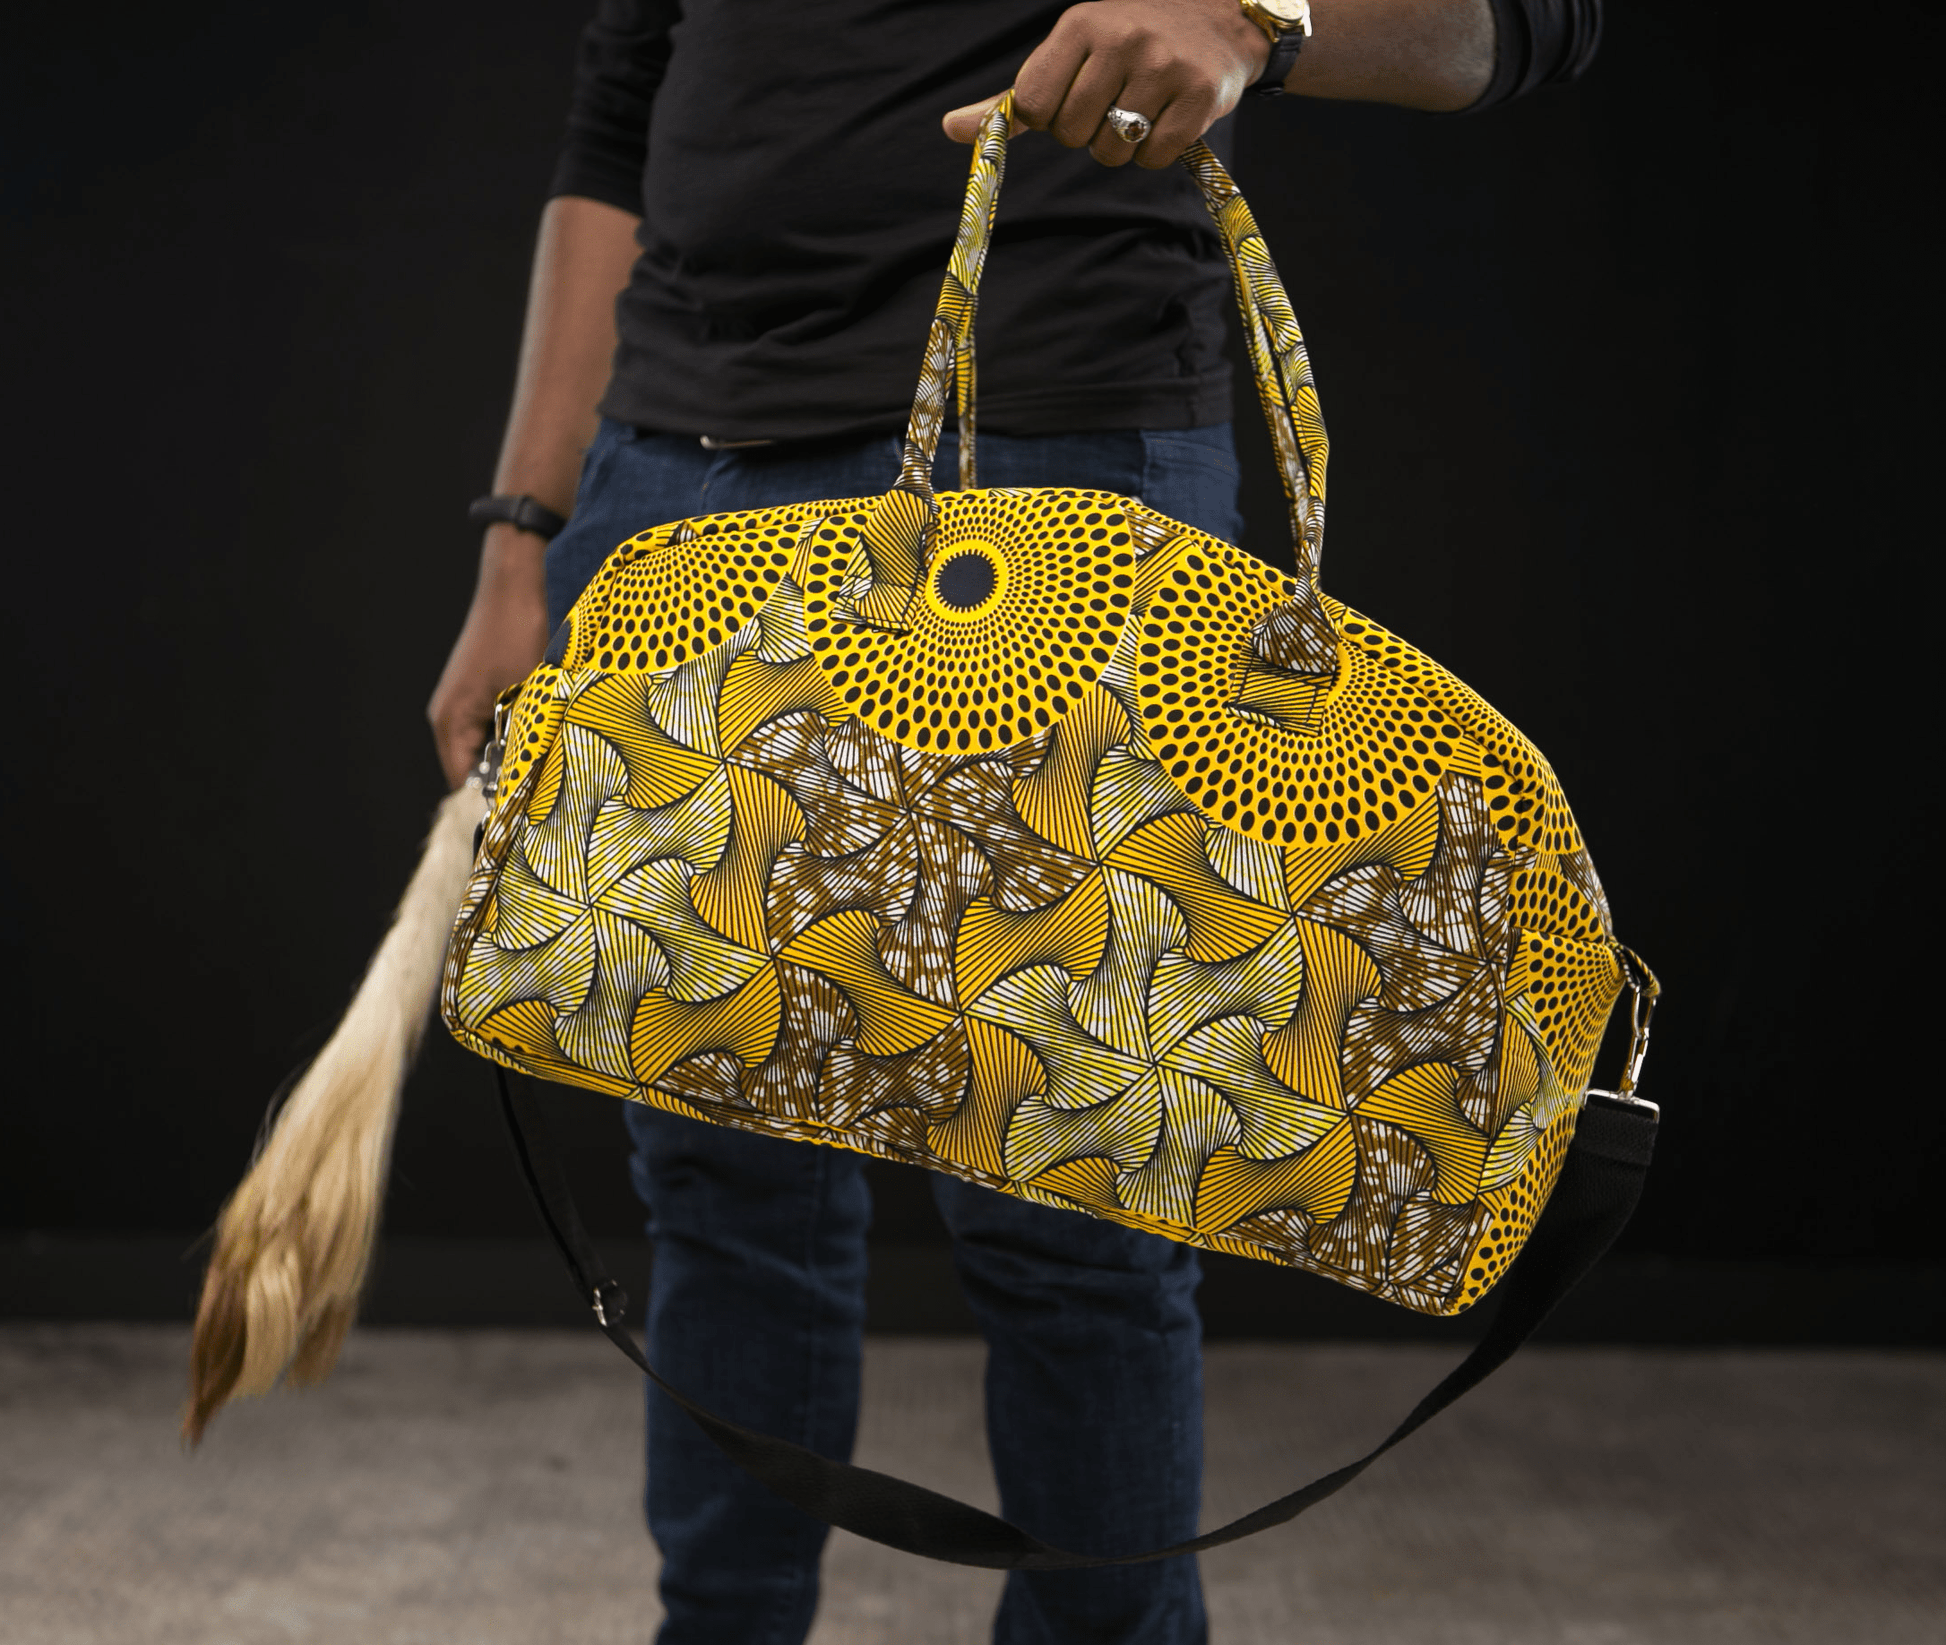 Ankara Unisex Travel - Authentic African handicrafts | Clothing, bags, painting, toys & more - CULTURE HUB by Muthoni Unchained